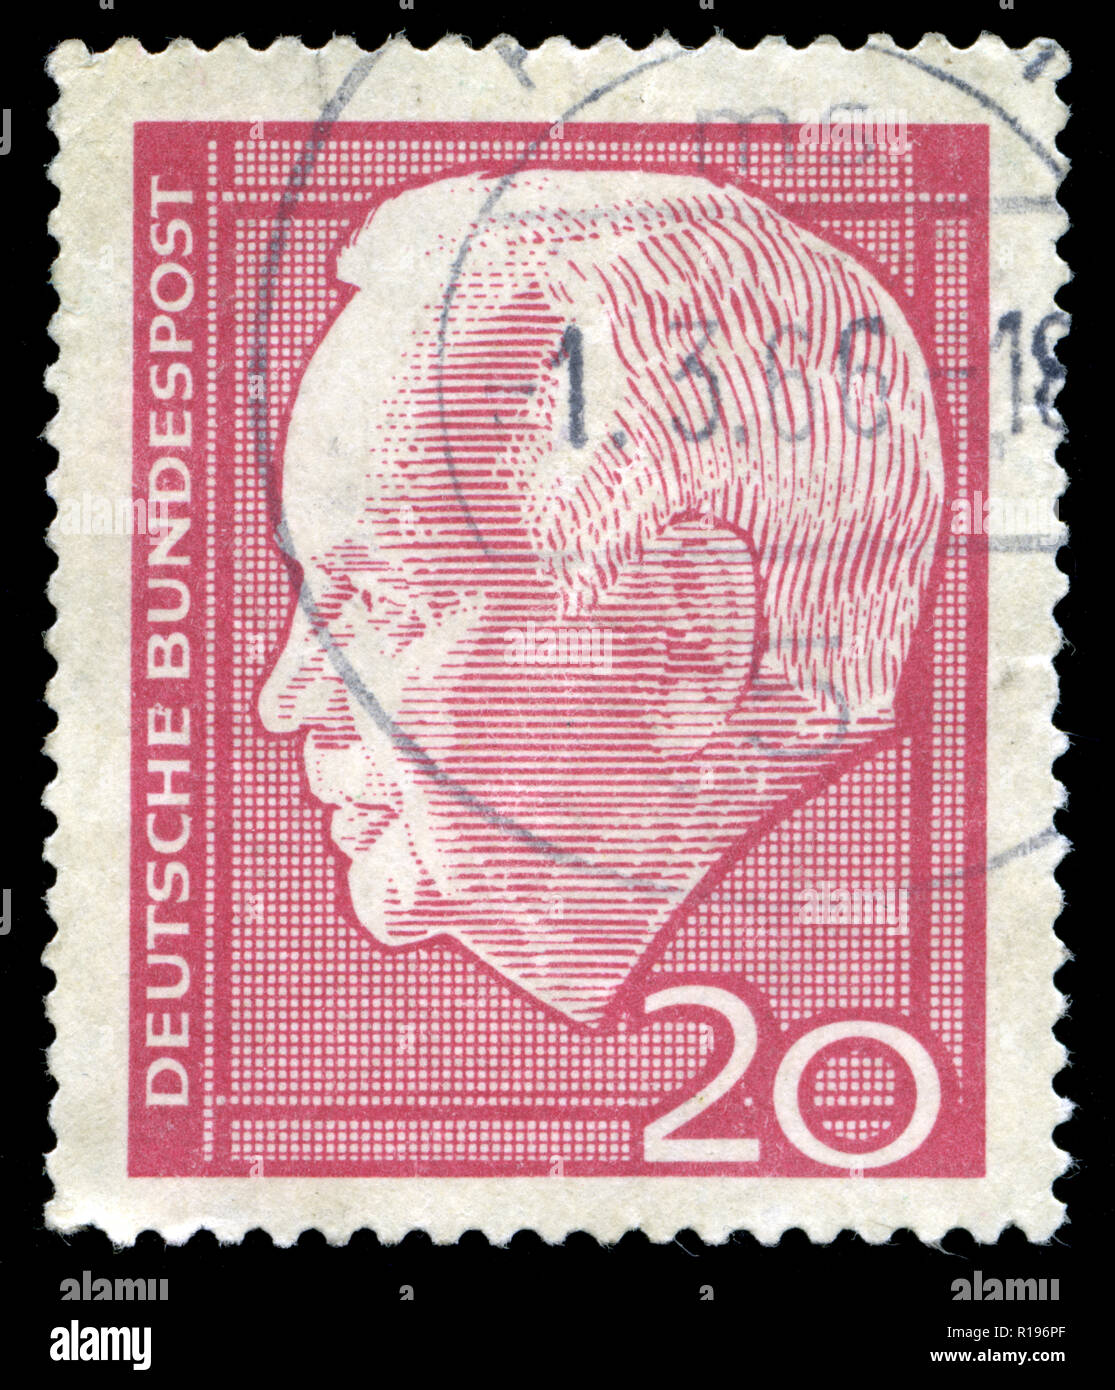 Postmarked stamp from the Federal Republic of Germany in the Lübke, Heinrich series issued in 1964 Stock Photo